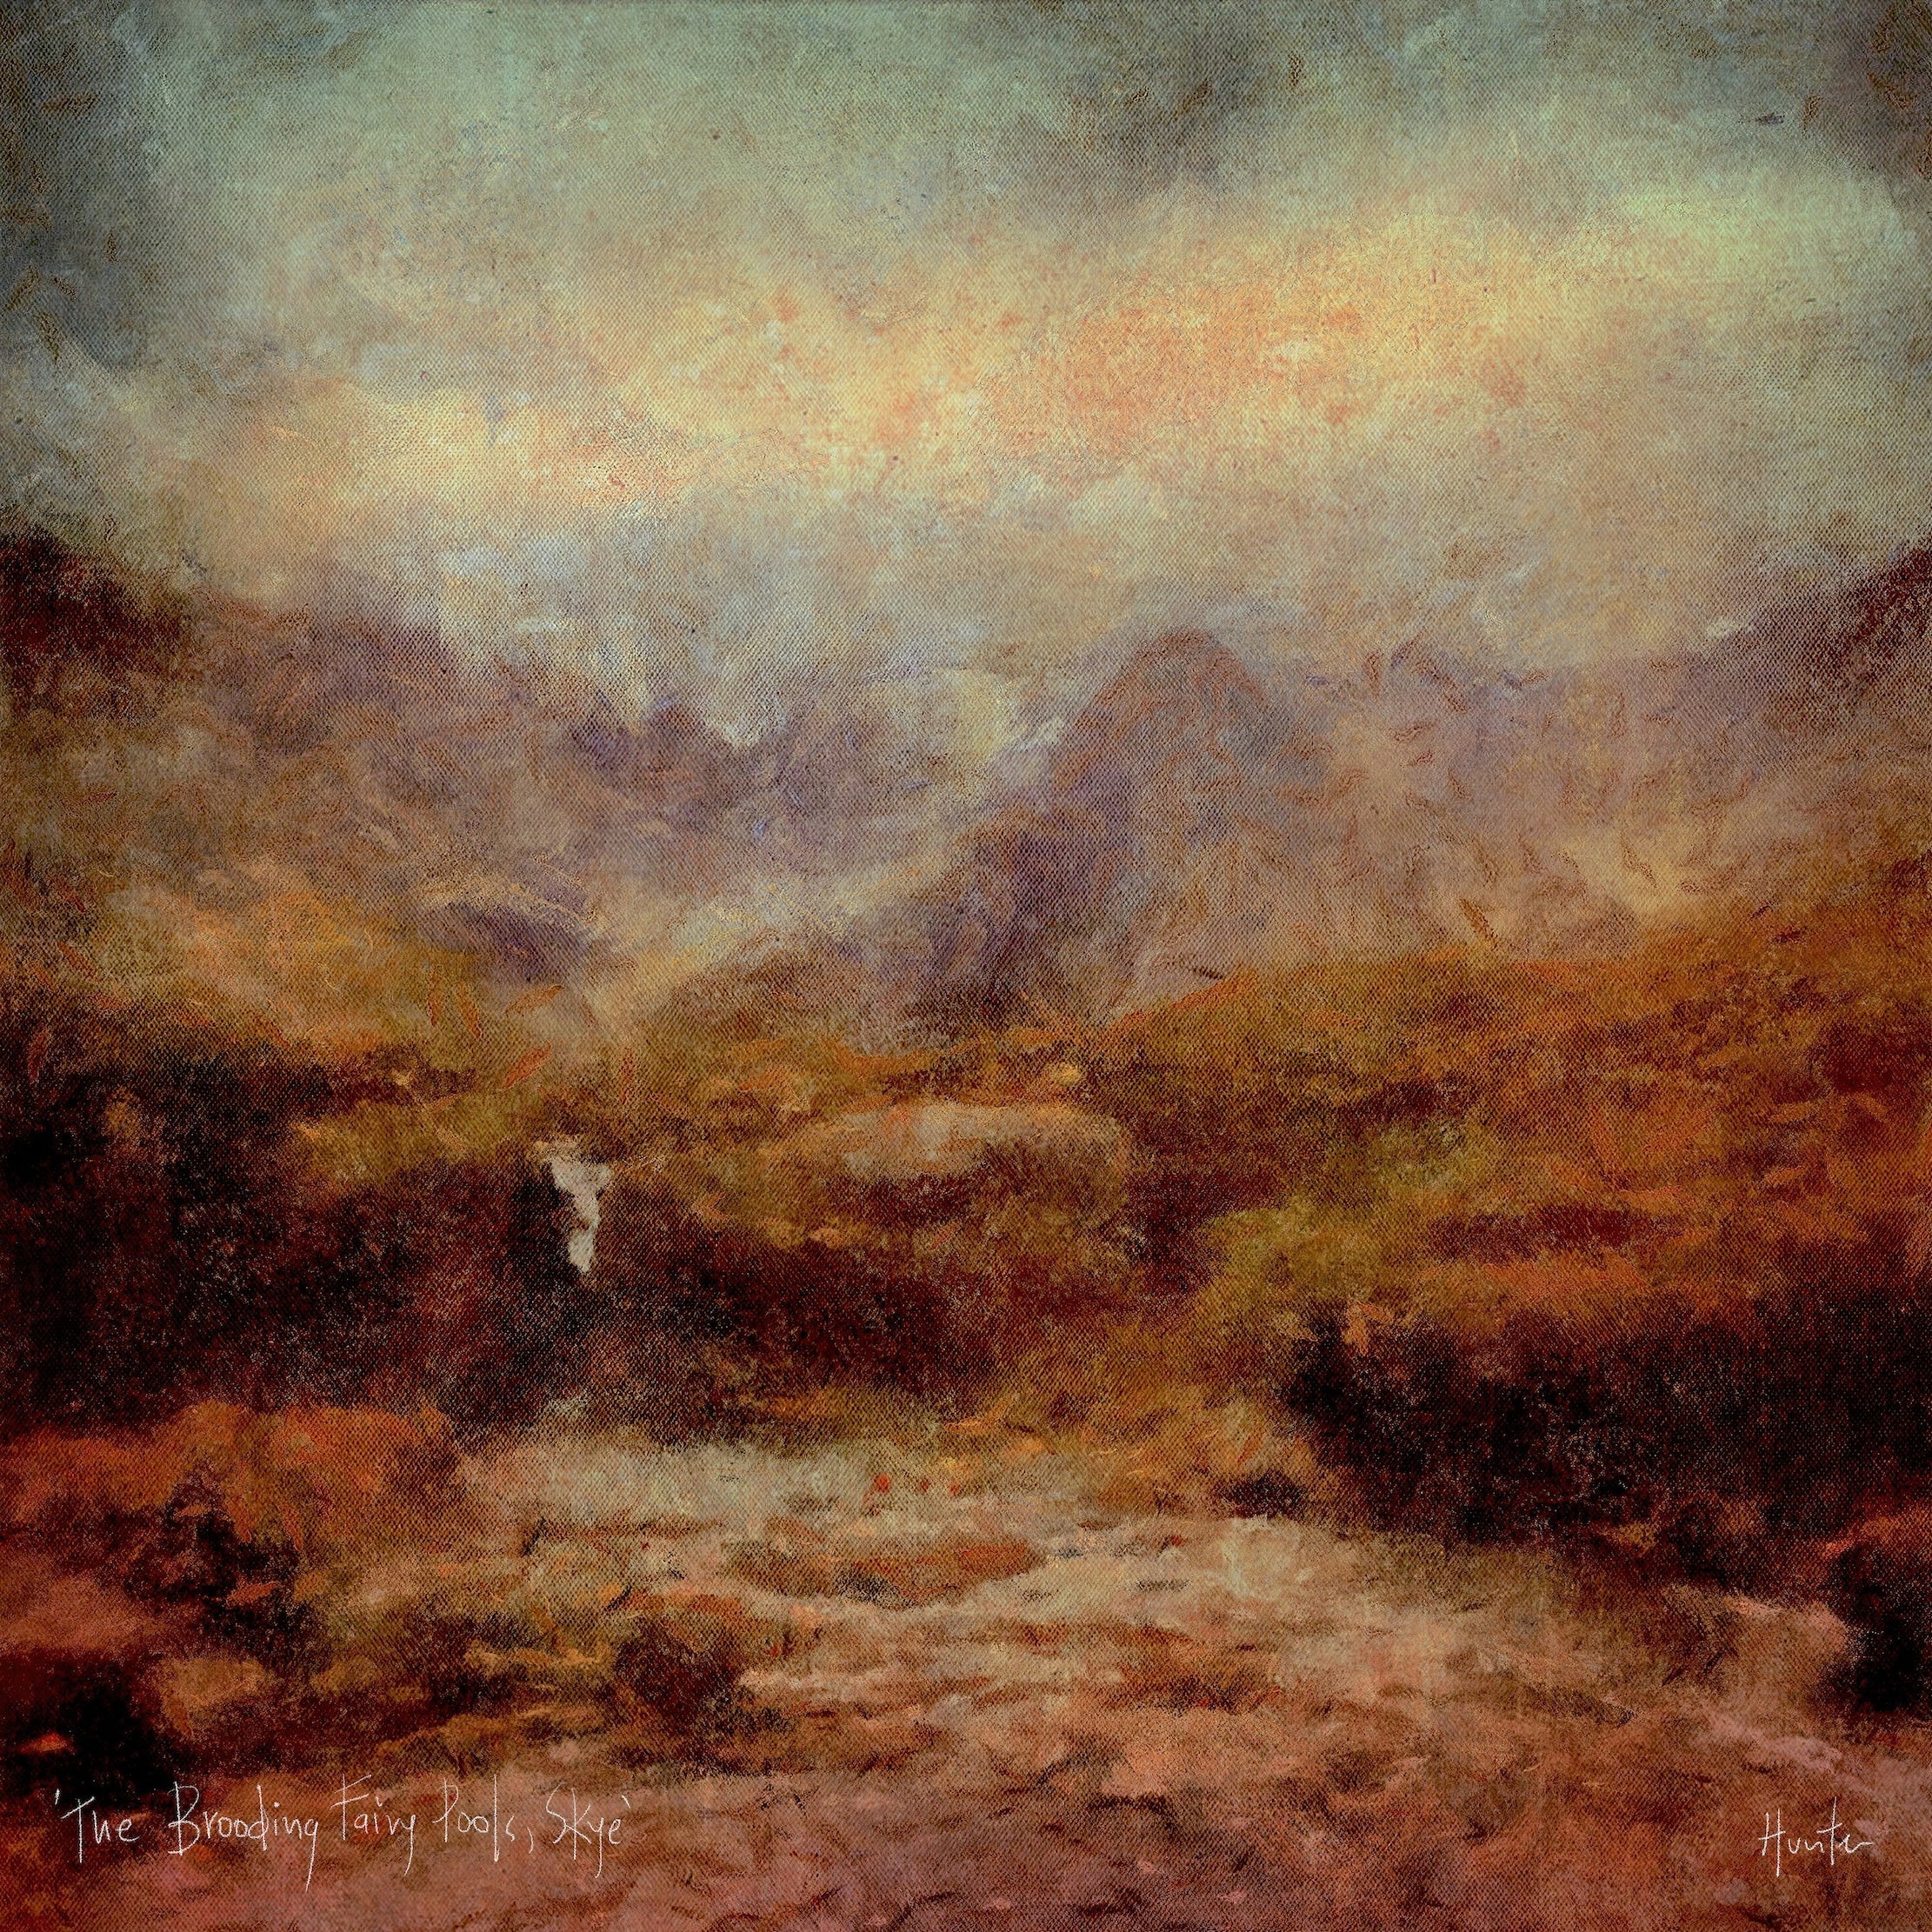 The Brooding Fairy Pools | Scotland In Your Pocket Art Print-Scotland In Your Pocket Framed Prints-Skye Art Gallery-Paintings, Prints, Homeware, Art Gifts From Scotland By Scottish Artist Kevin Hunter